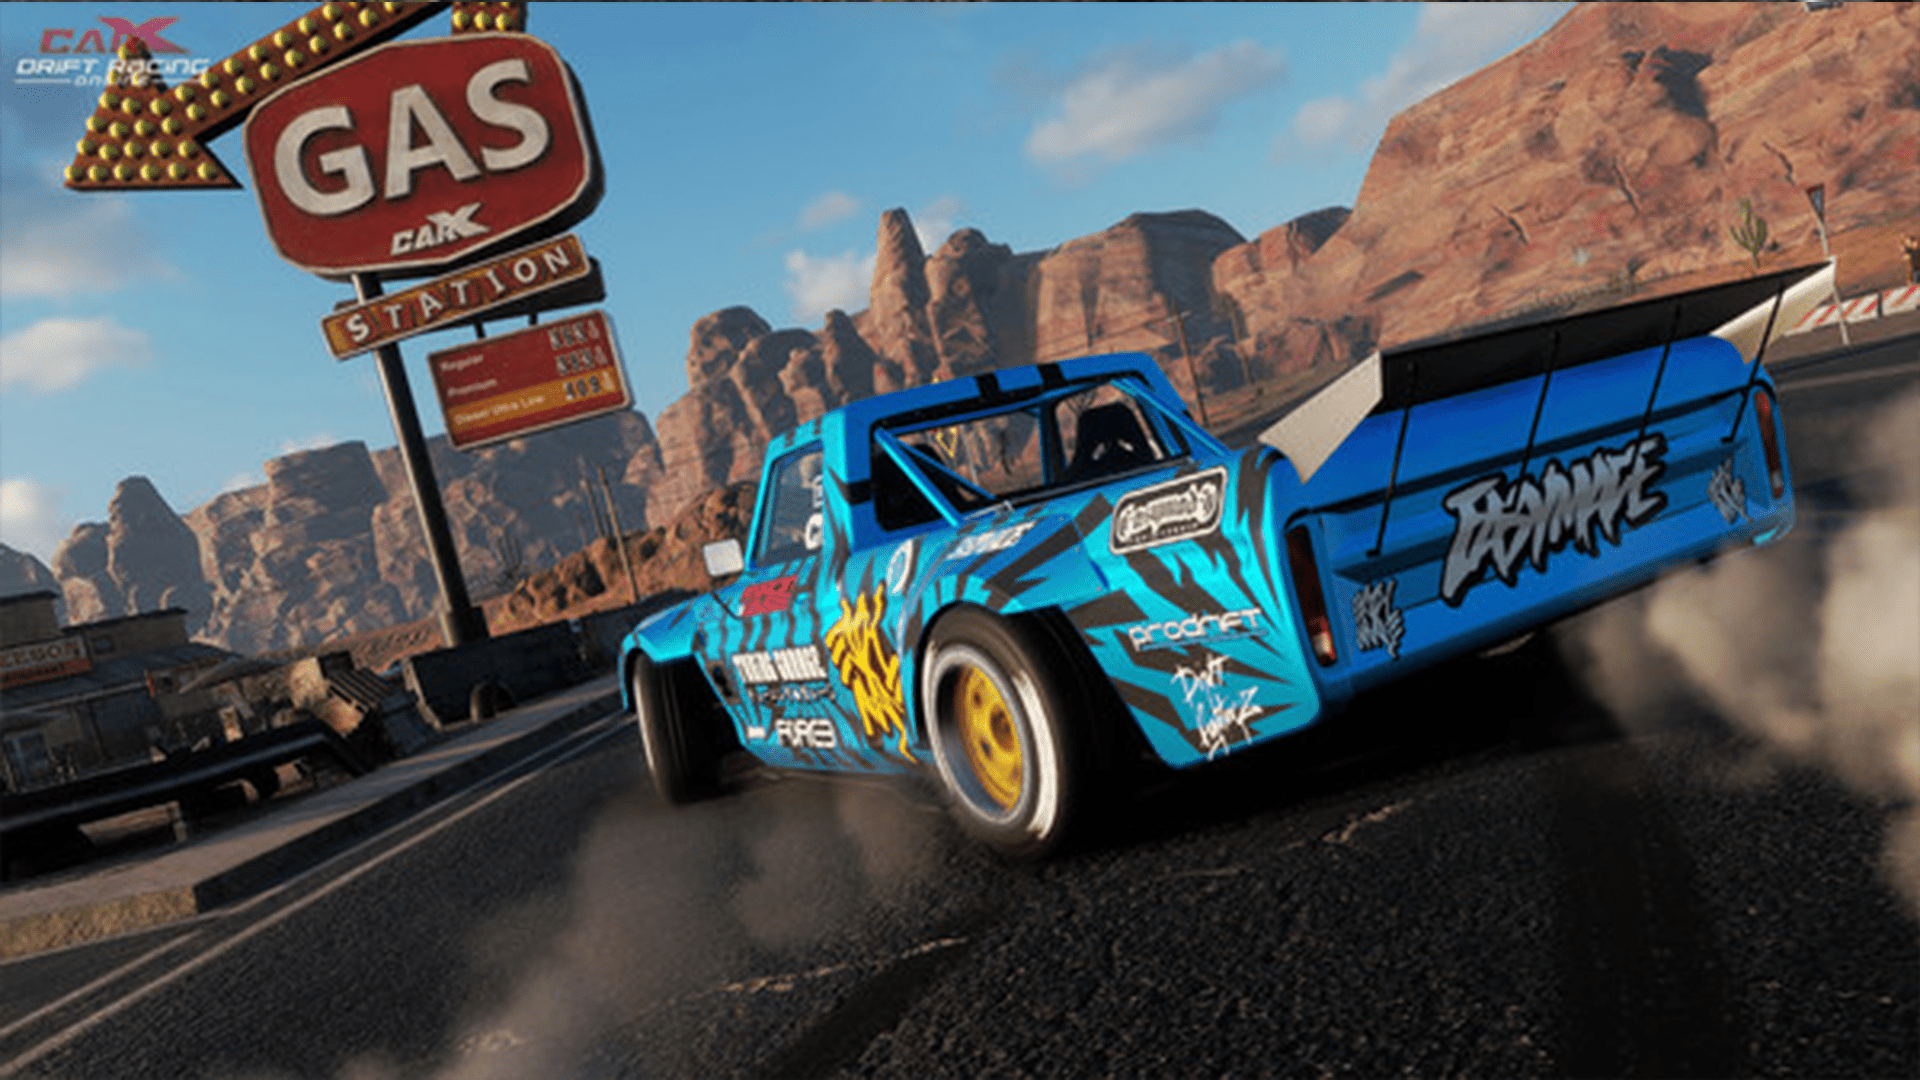 CarX Drift Racing Online update adds four new cars